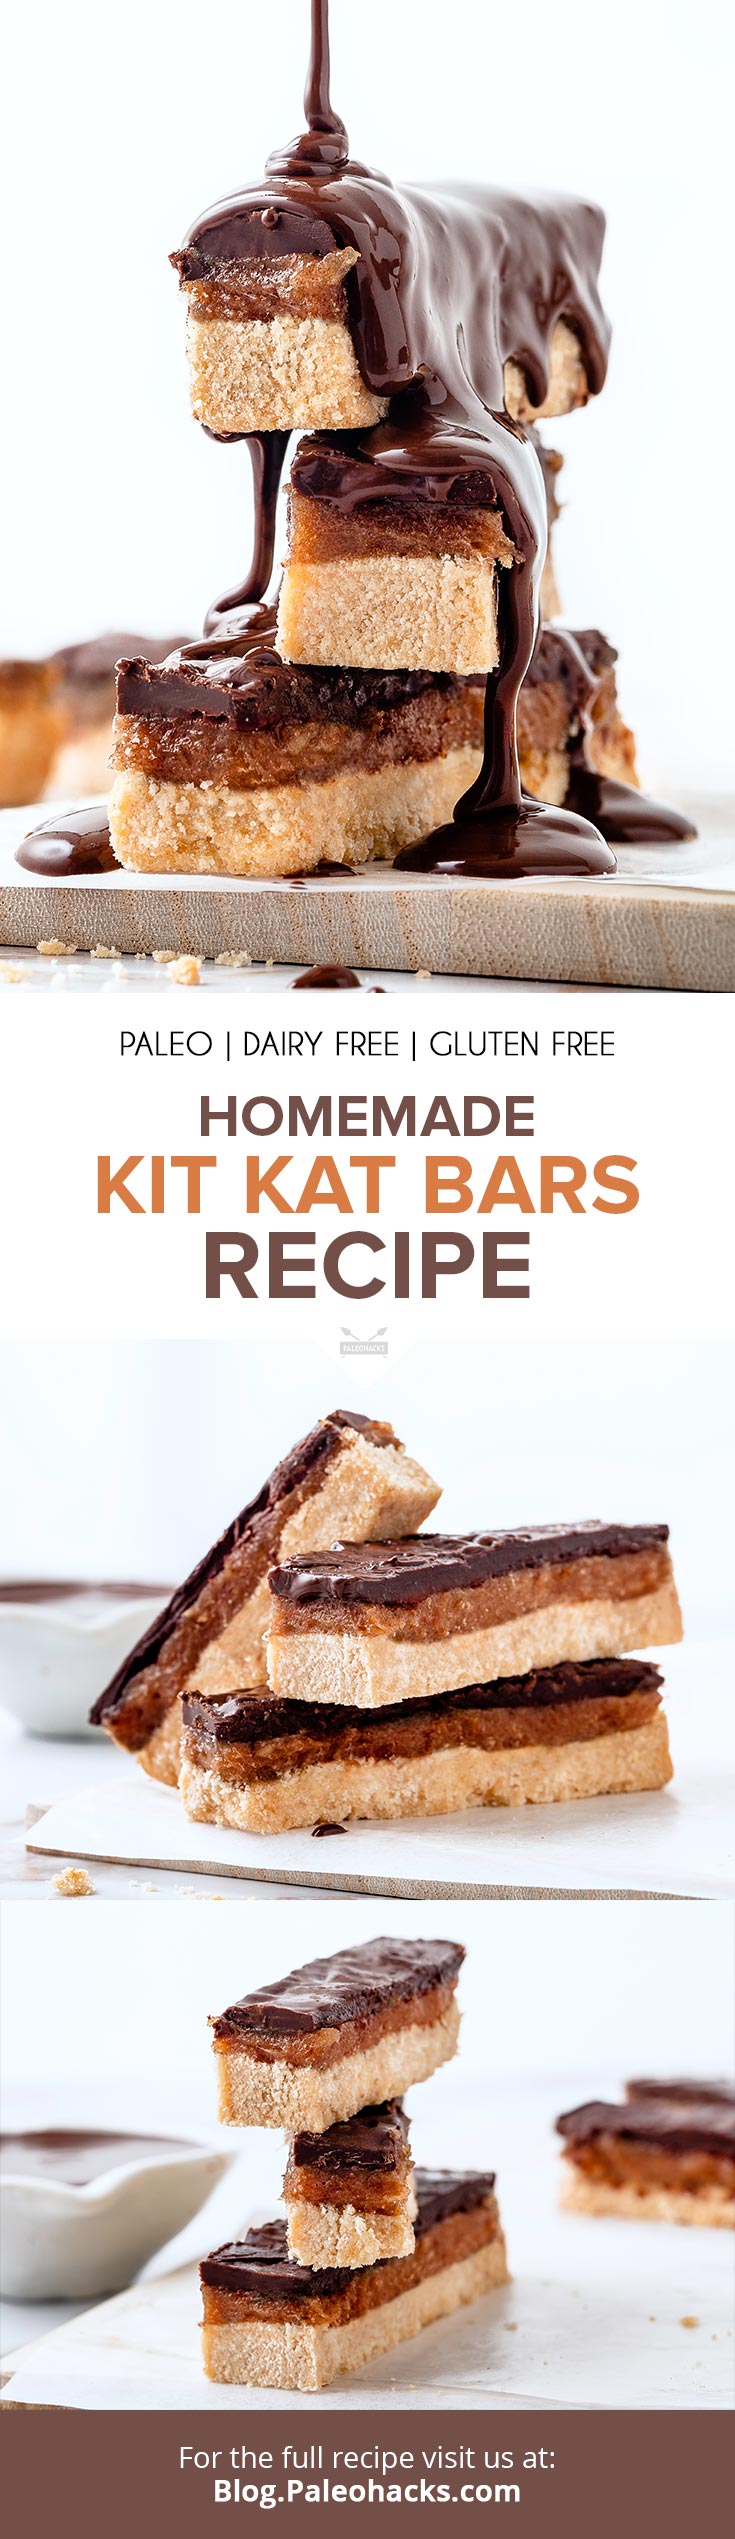 Homemade Paleo Kit Kats that are gluten-, grain-, dairy- and refined sugar-free. Now you can have your candy and eat it too!